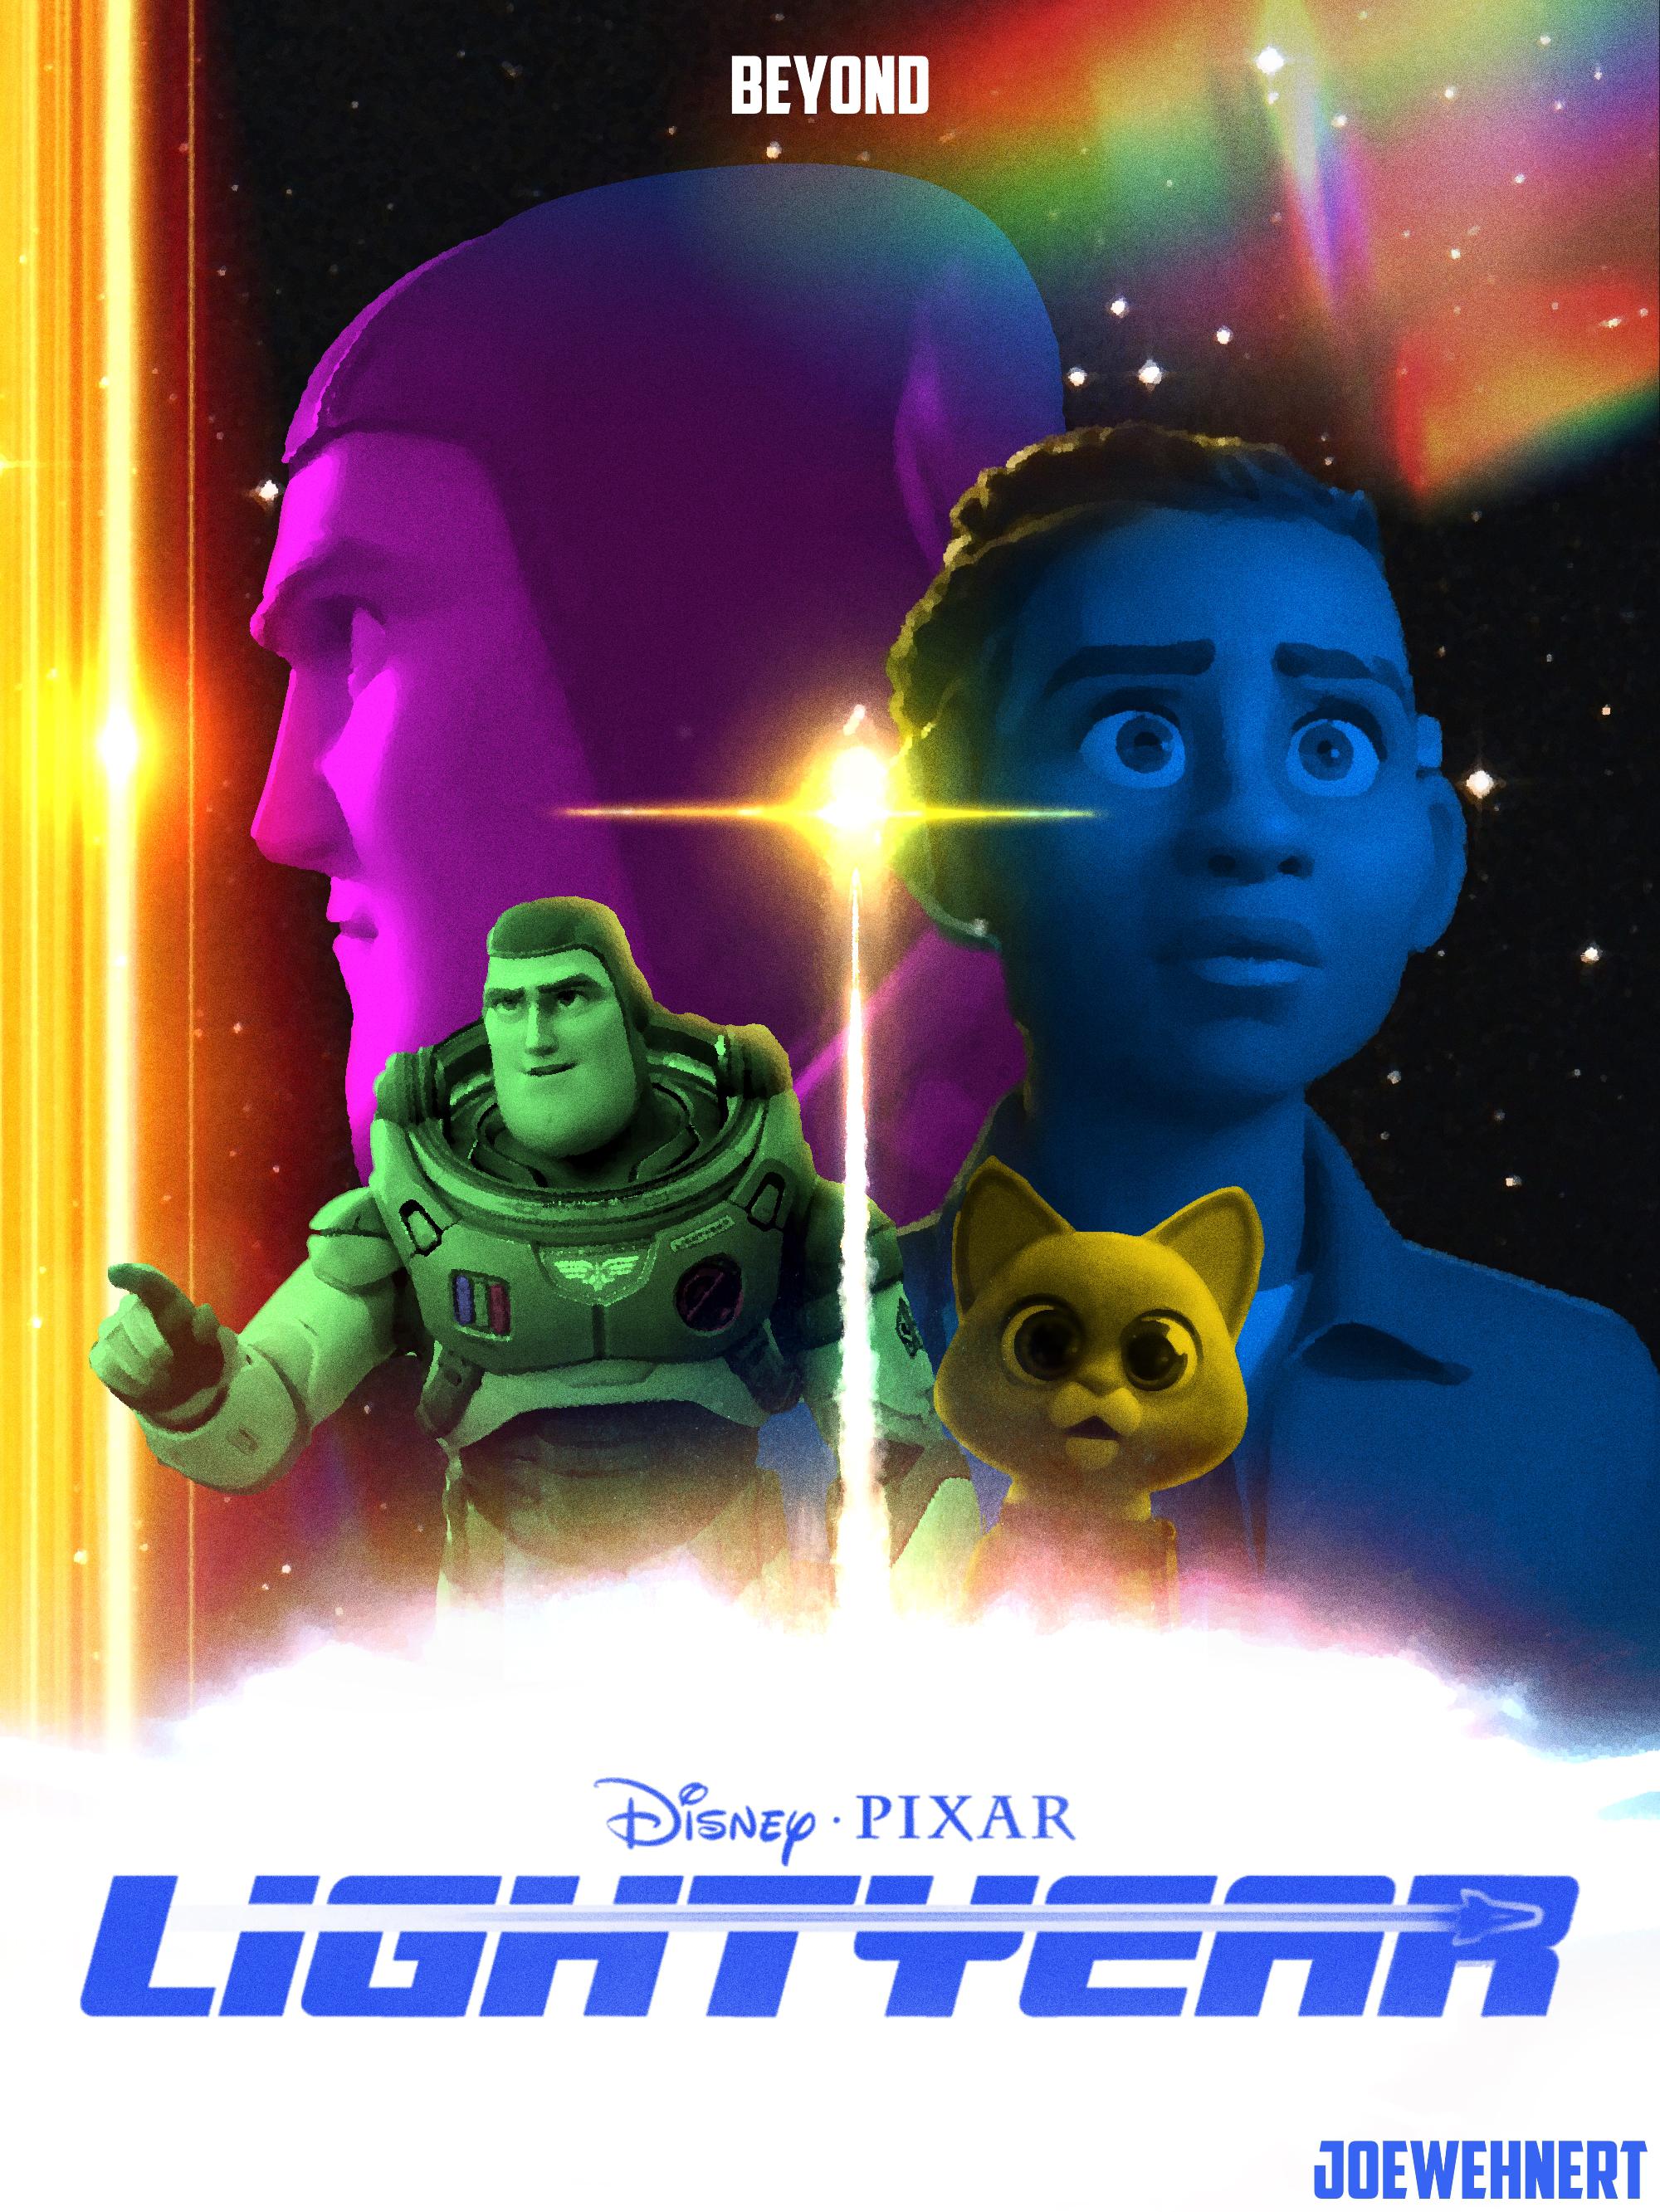 Fan Poster I did for LIGHTYEAR Very excited Loved the trailer